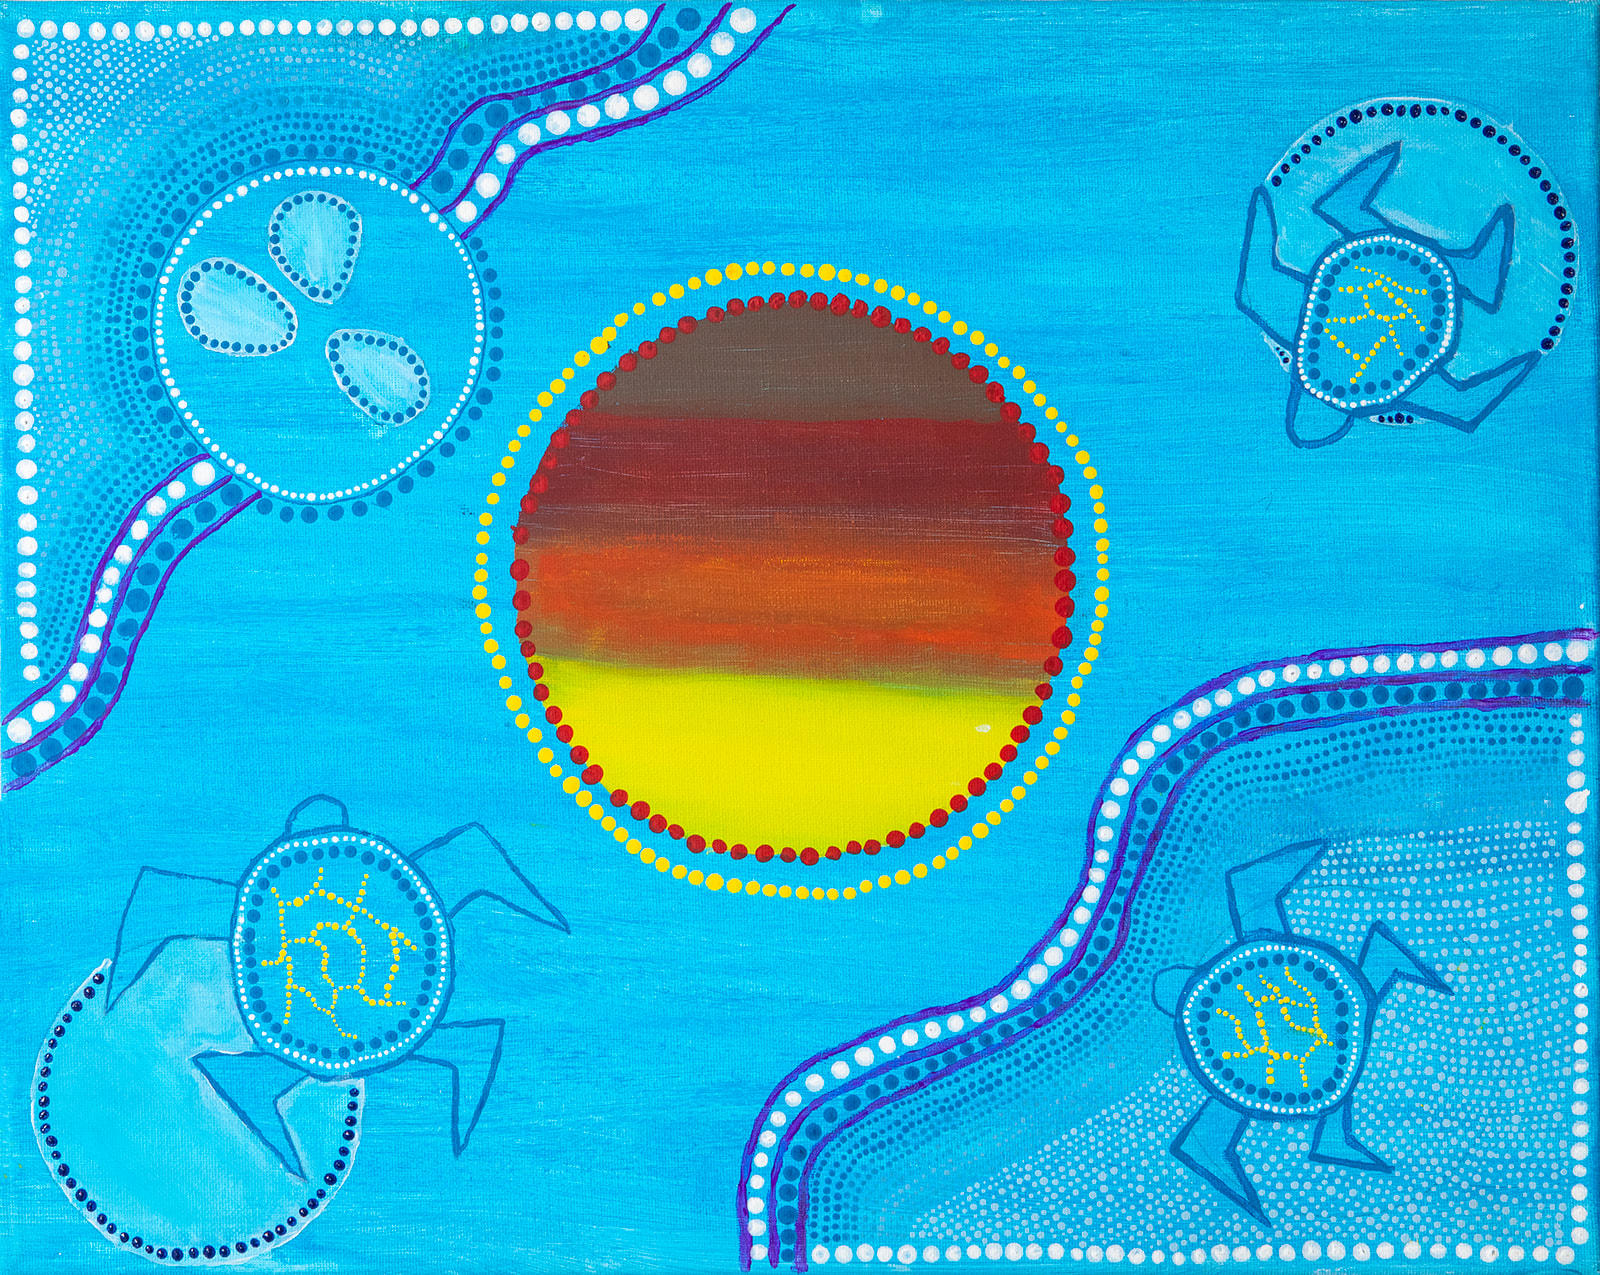 40. Indi Mitchell, 'Together', paint and pencil, Year 7, Binnaway Central School